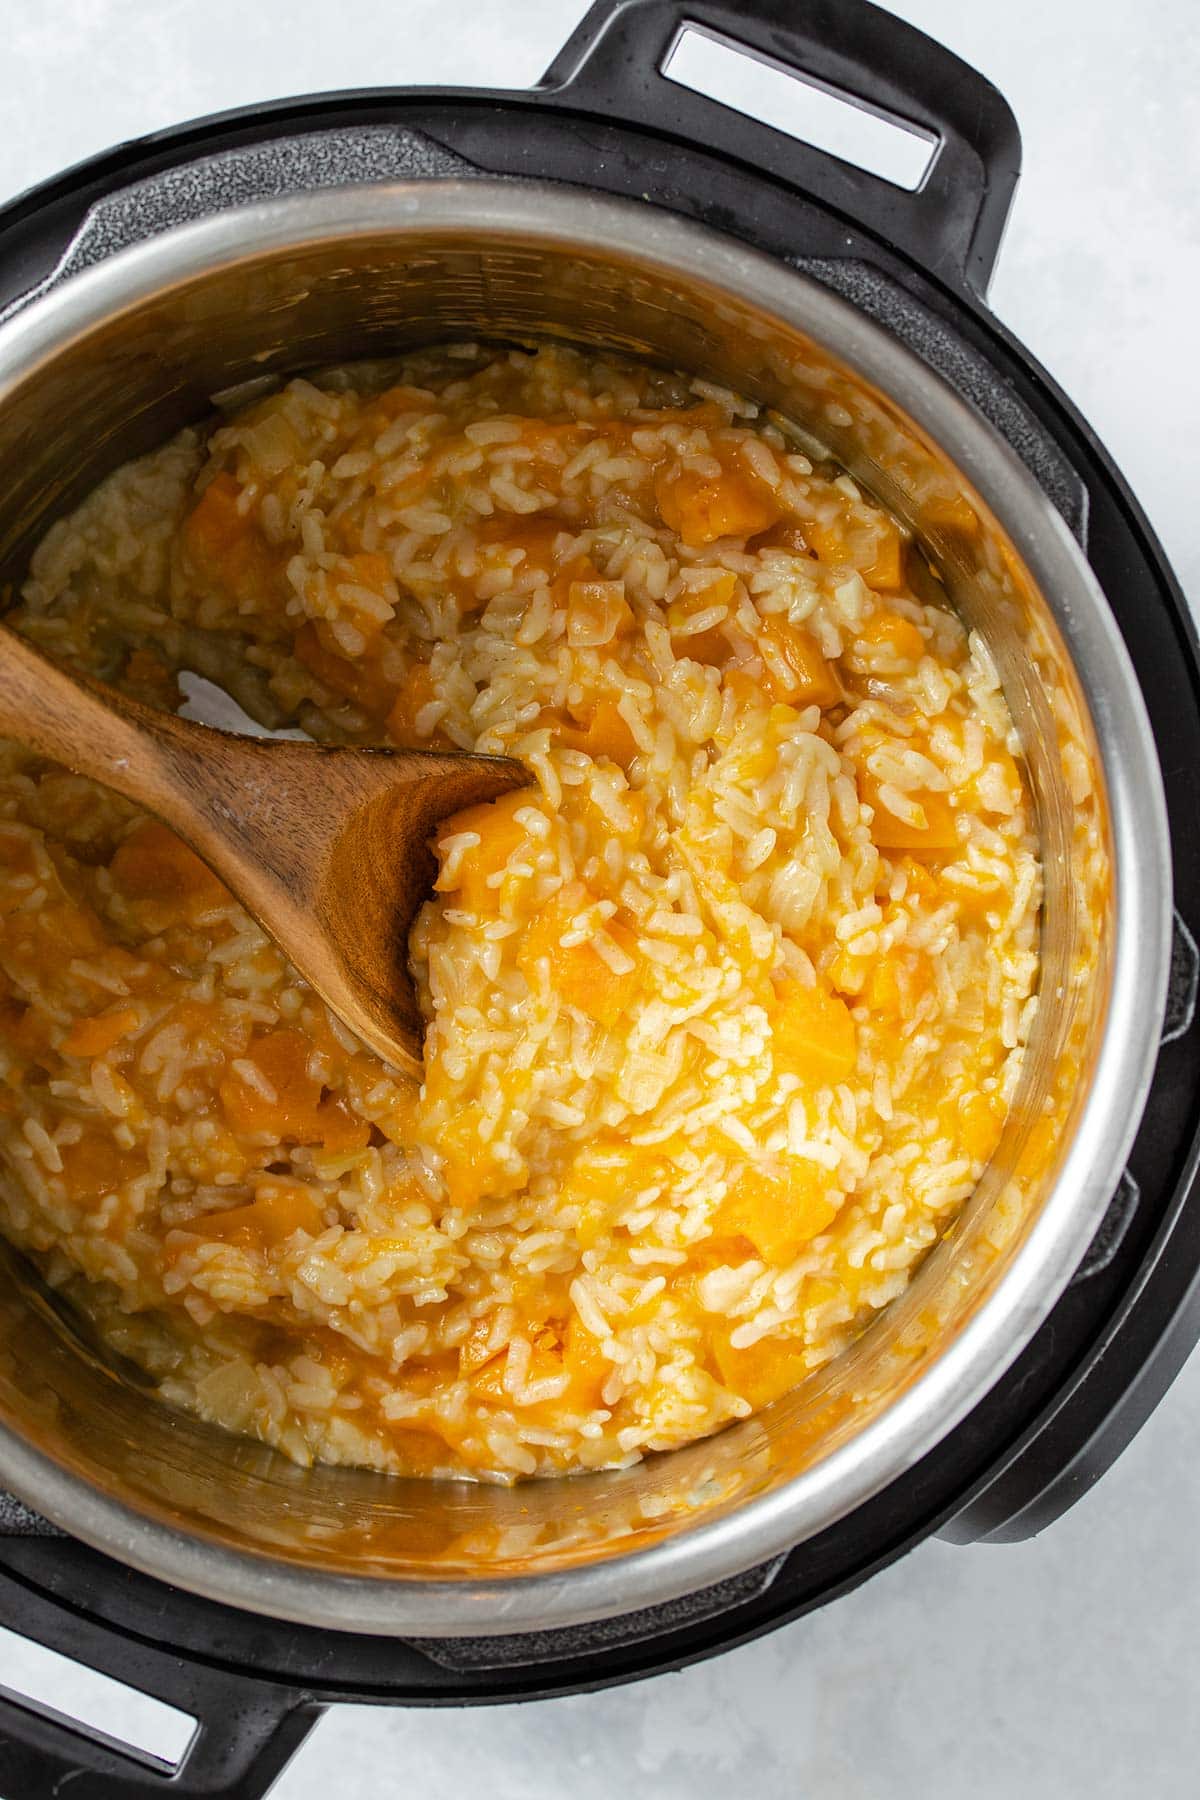 Butternut squash risotto being stirred with a wooden spoon in an Instant Pot.